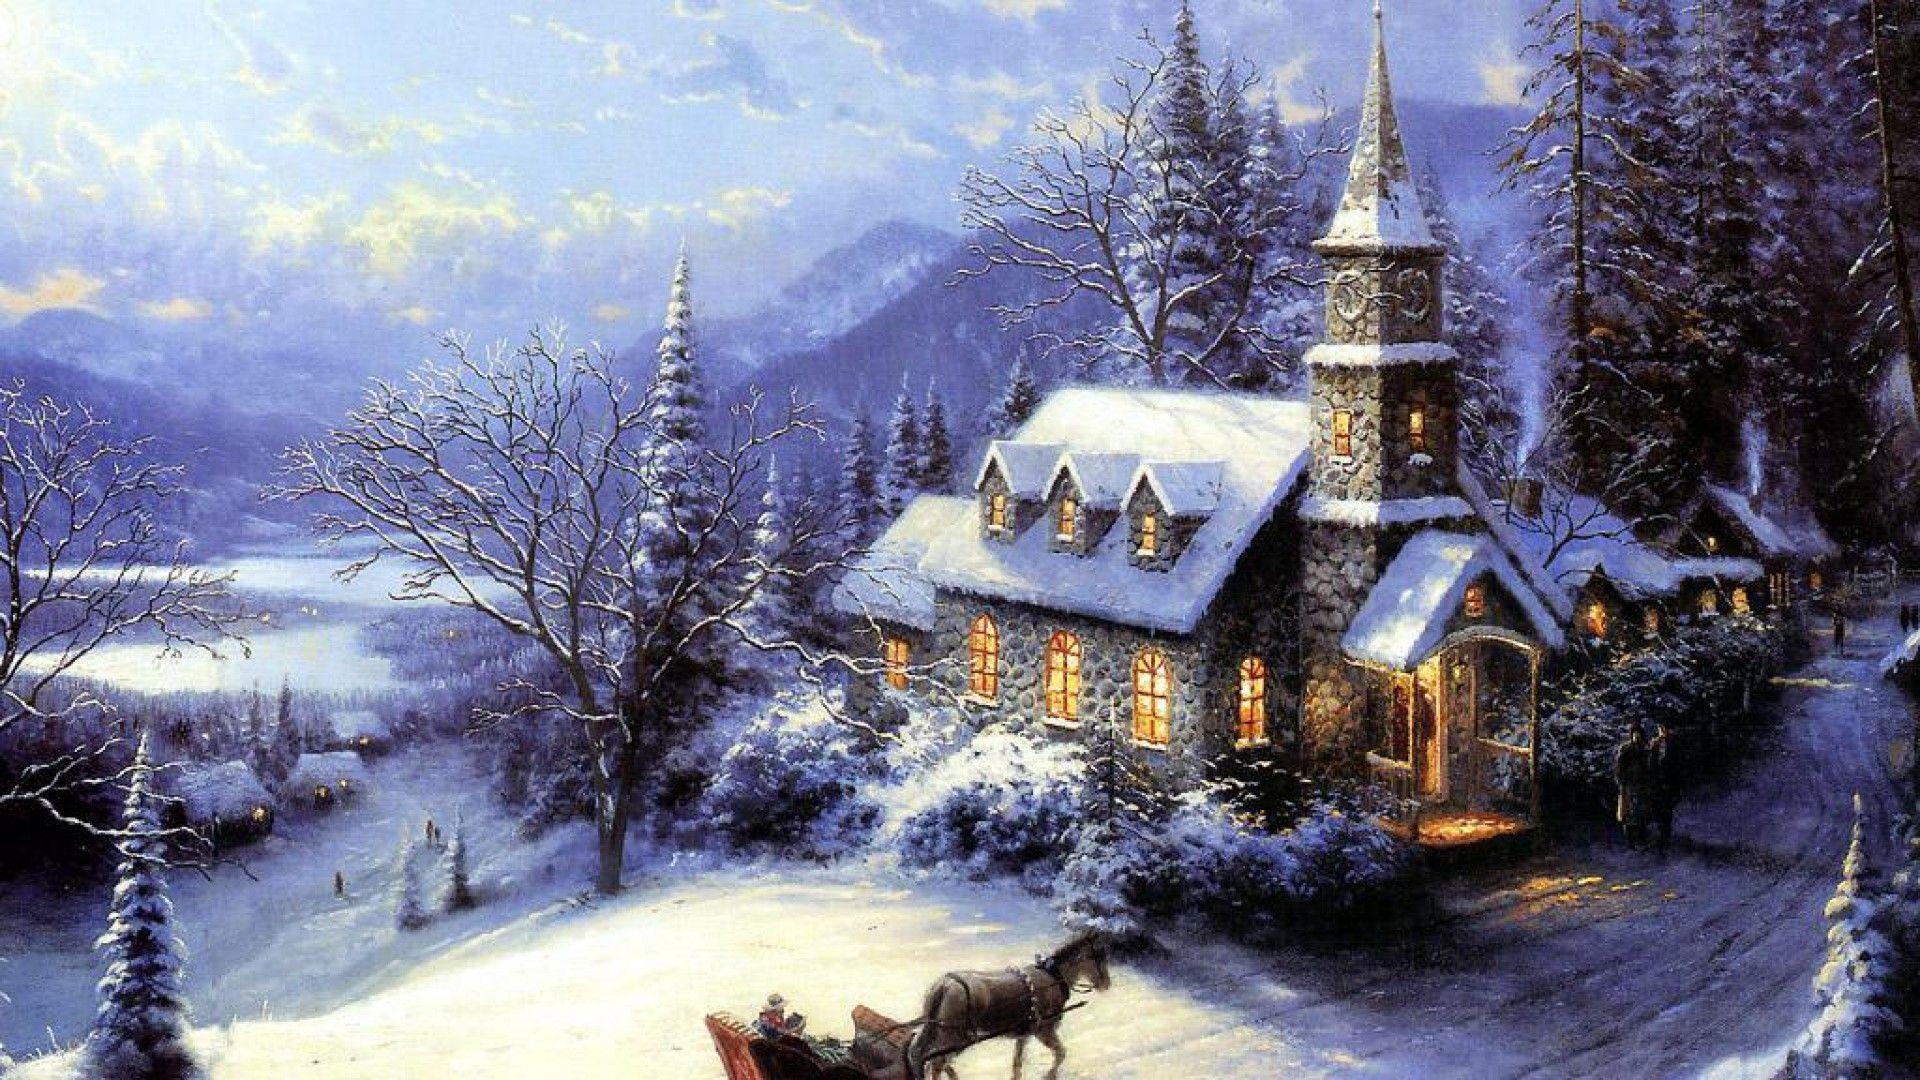 Christmas In An Alpine Village Wallpaper Wide or HD. Holidays